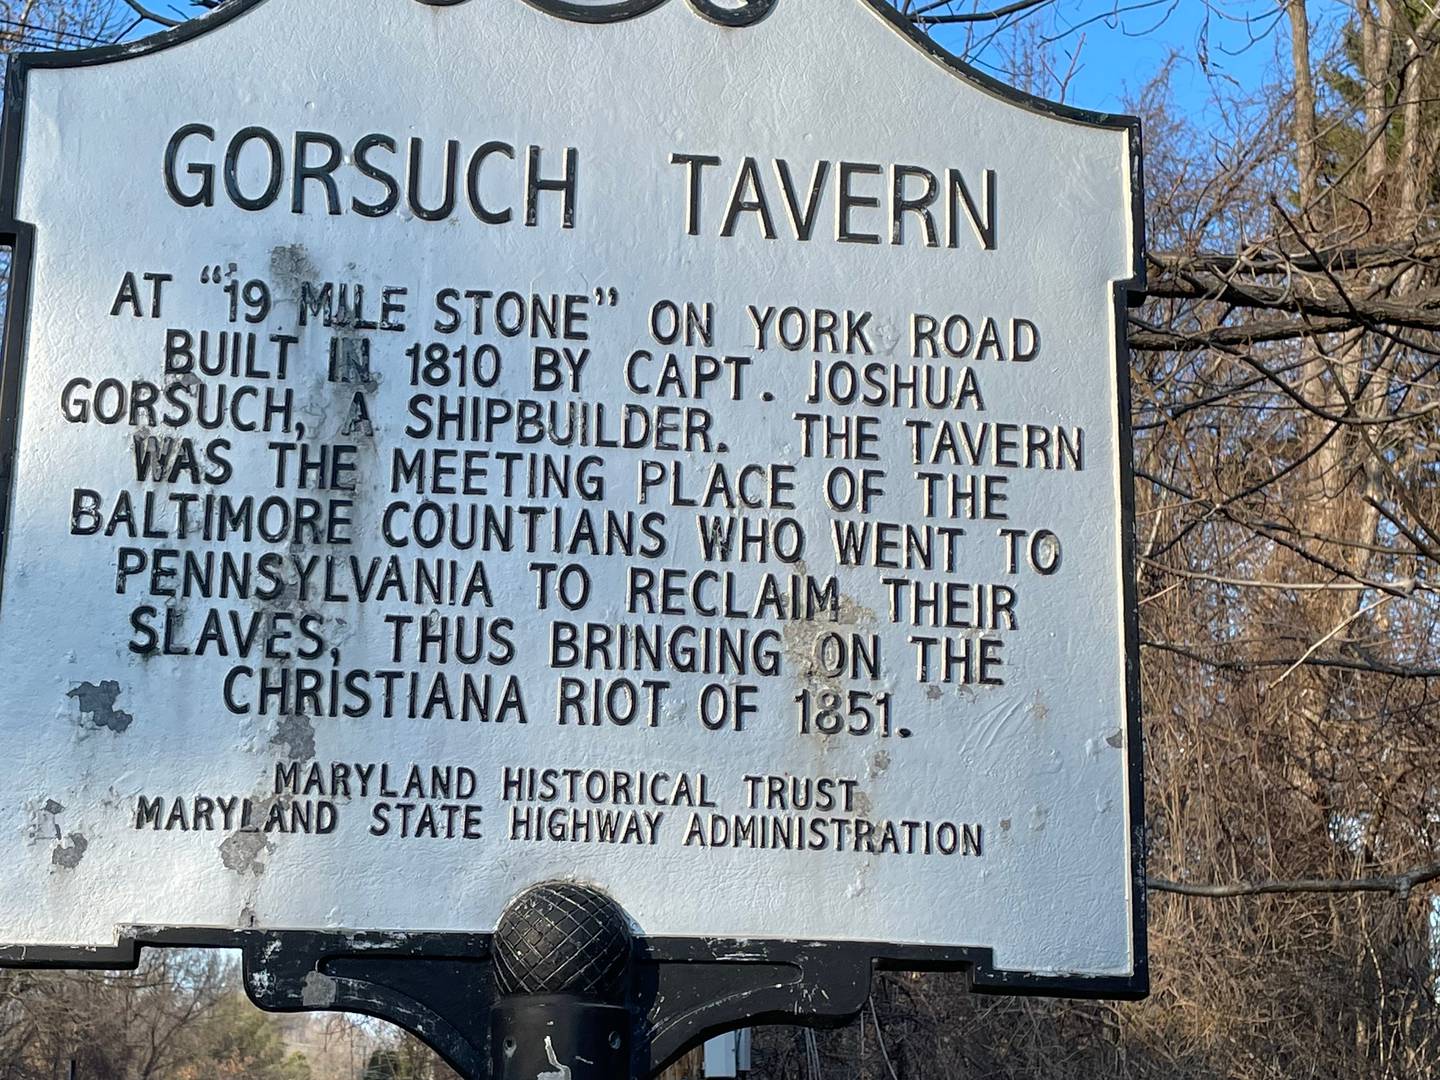 The sign where the Gorsuch Tavern once sat leaves out a lot of history; namely, that Dickinson Gorsuch was killed in the Christiana insurrection, and that the events that transpired there helped lead to the end of the Fugitive Slave Act and the beginning of the Civil War.